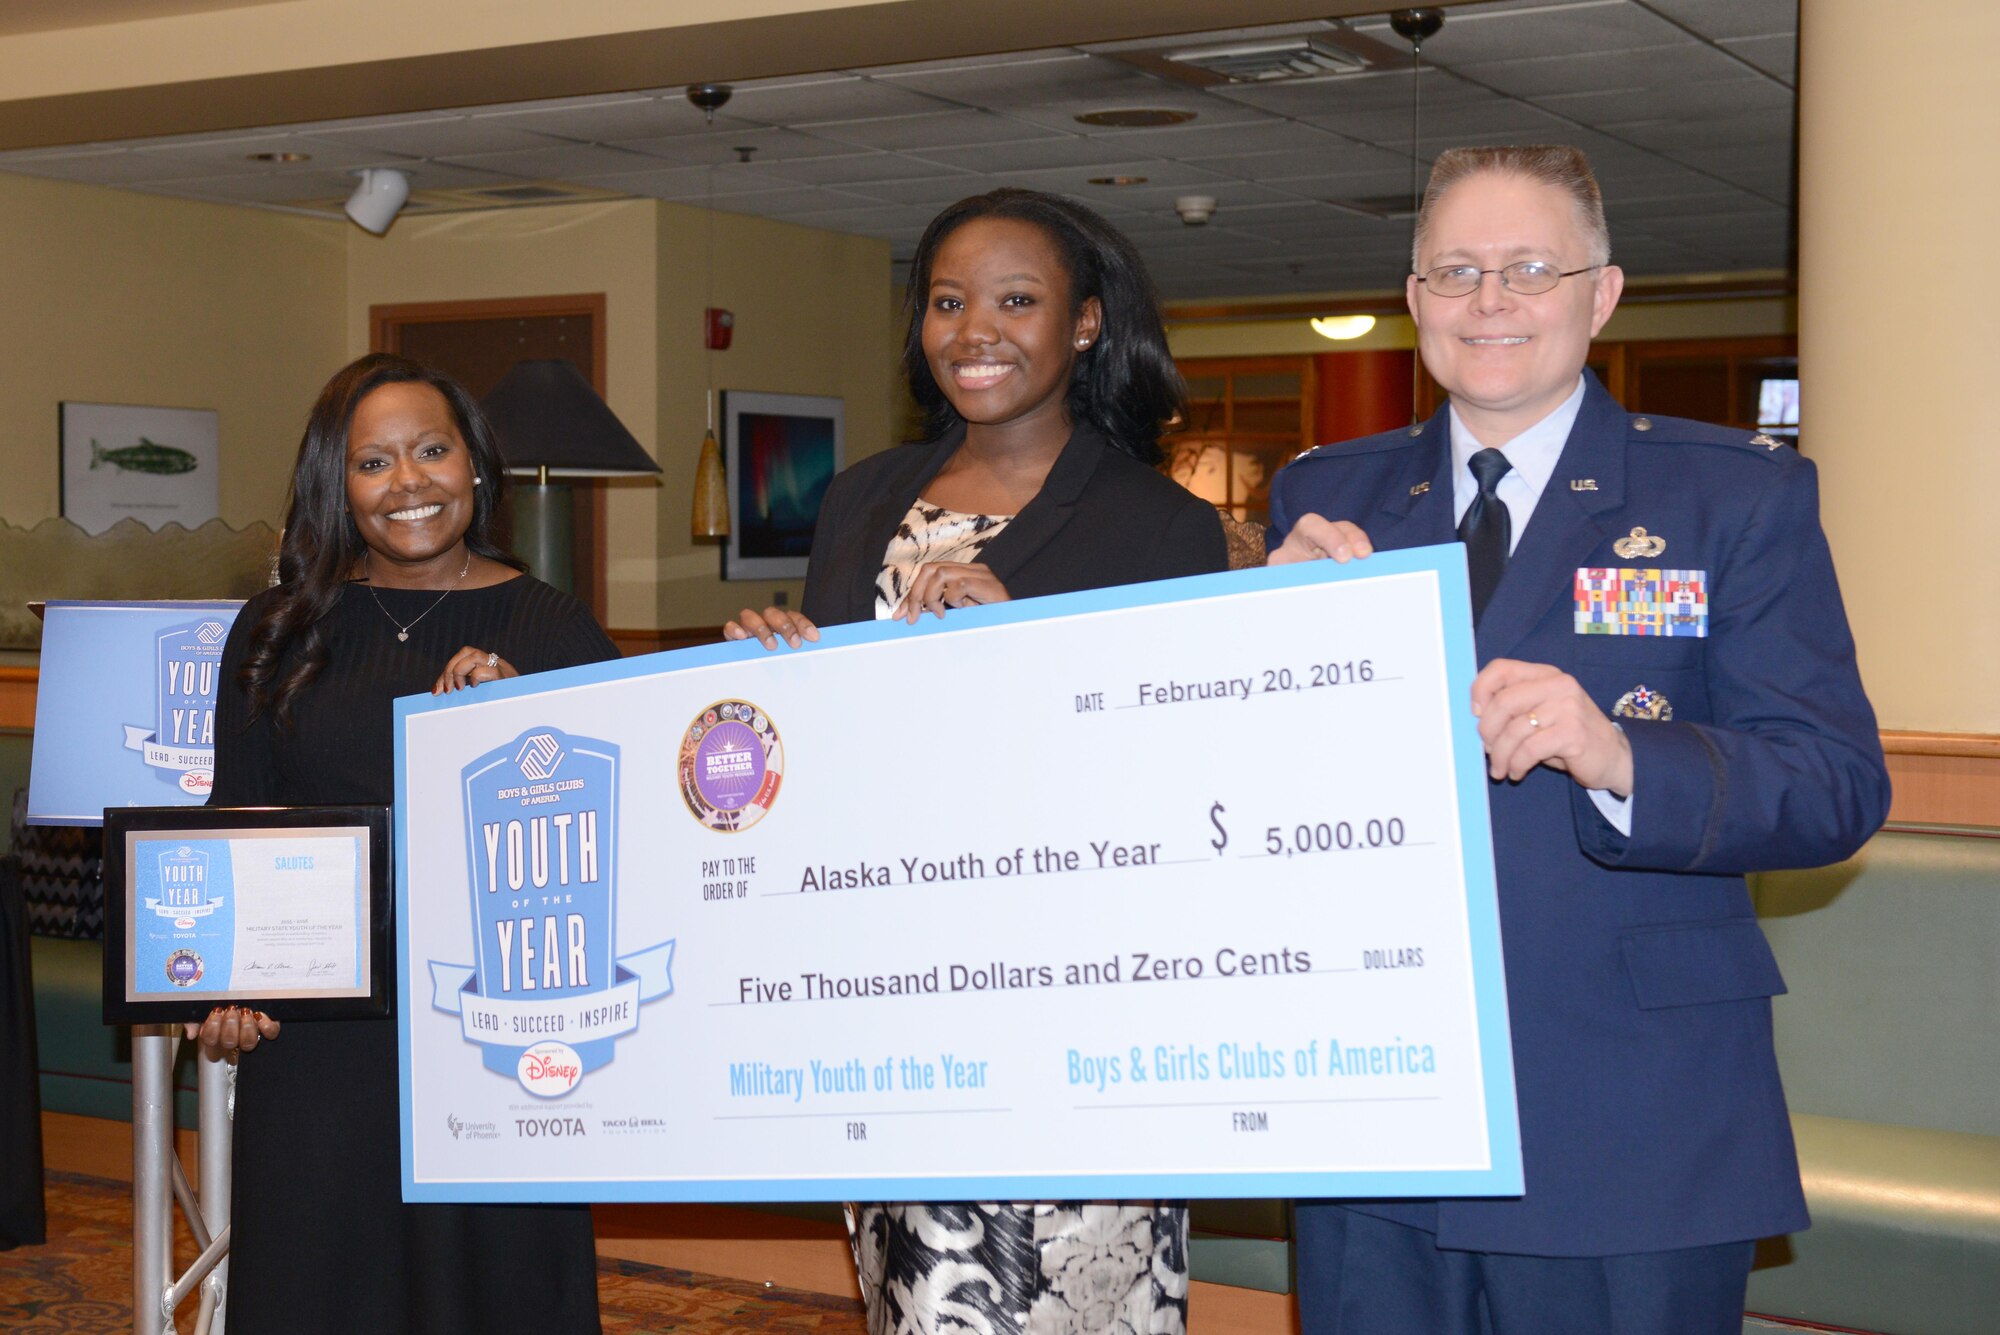 Terrill McFarland, the National Vice-President of Boys & Girls Clubs of America Military Outreach Services, presents a $5,000 scholarship to MiKaila Alexander, a senior at Ben Eielson High School, with Col. Richard Cole, the 354th Mission Support Group commander, during the 2016 Alaska Youth of the Year ceremony at the Westmark Hotel, Feb. 20, 2016, in Fairbanks, Alaska. Alexander won the Military Youth of the Year scholarship for the second year in a row and will compete at the next regional level this summer. (U.S. Air Force photo by Staff Sgt. Ashley Nicole Taylor/Released)